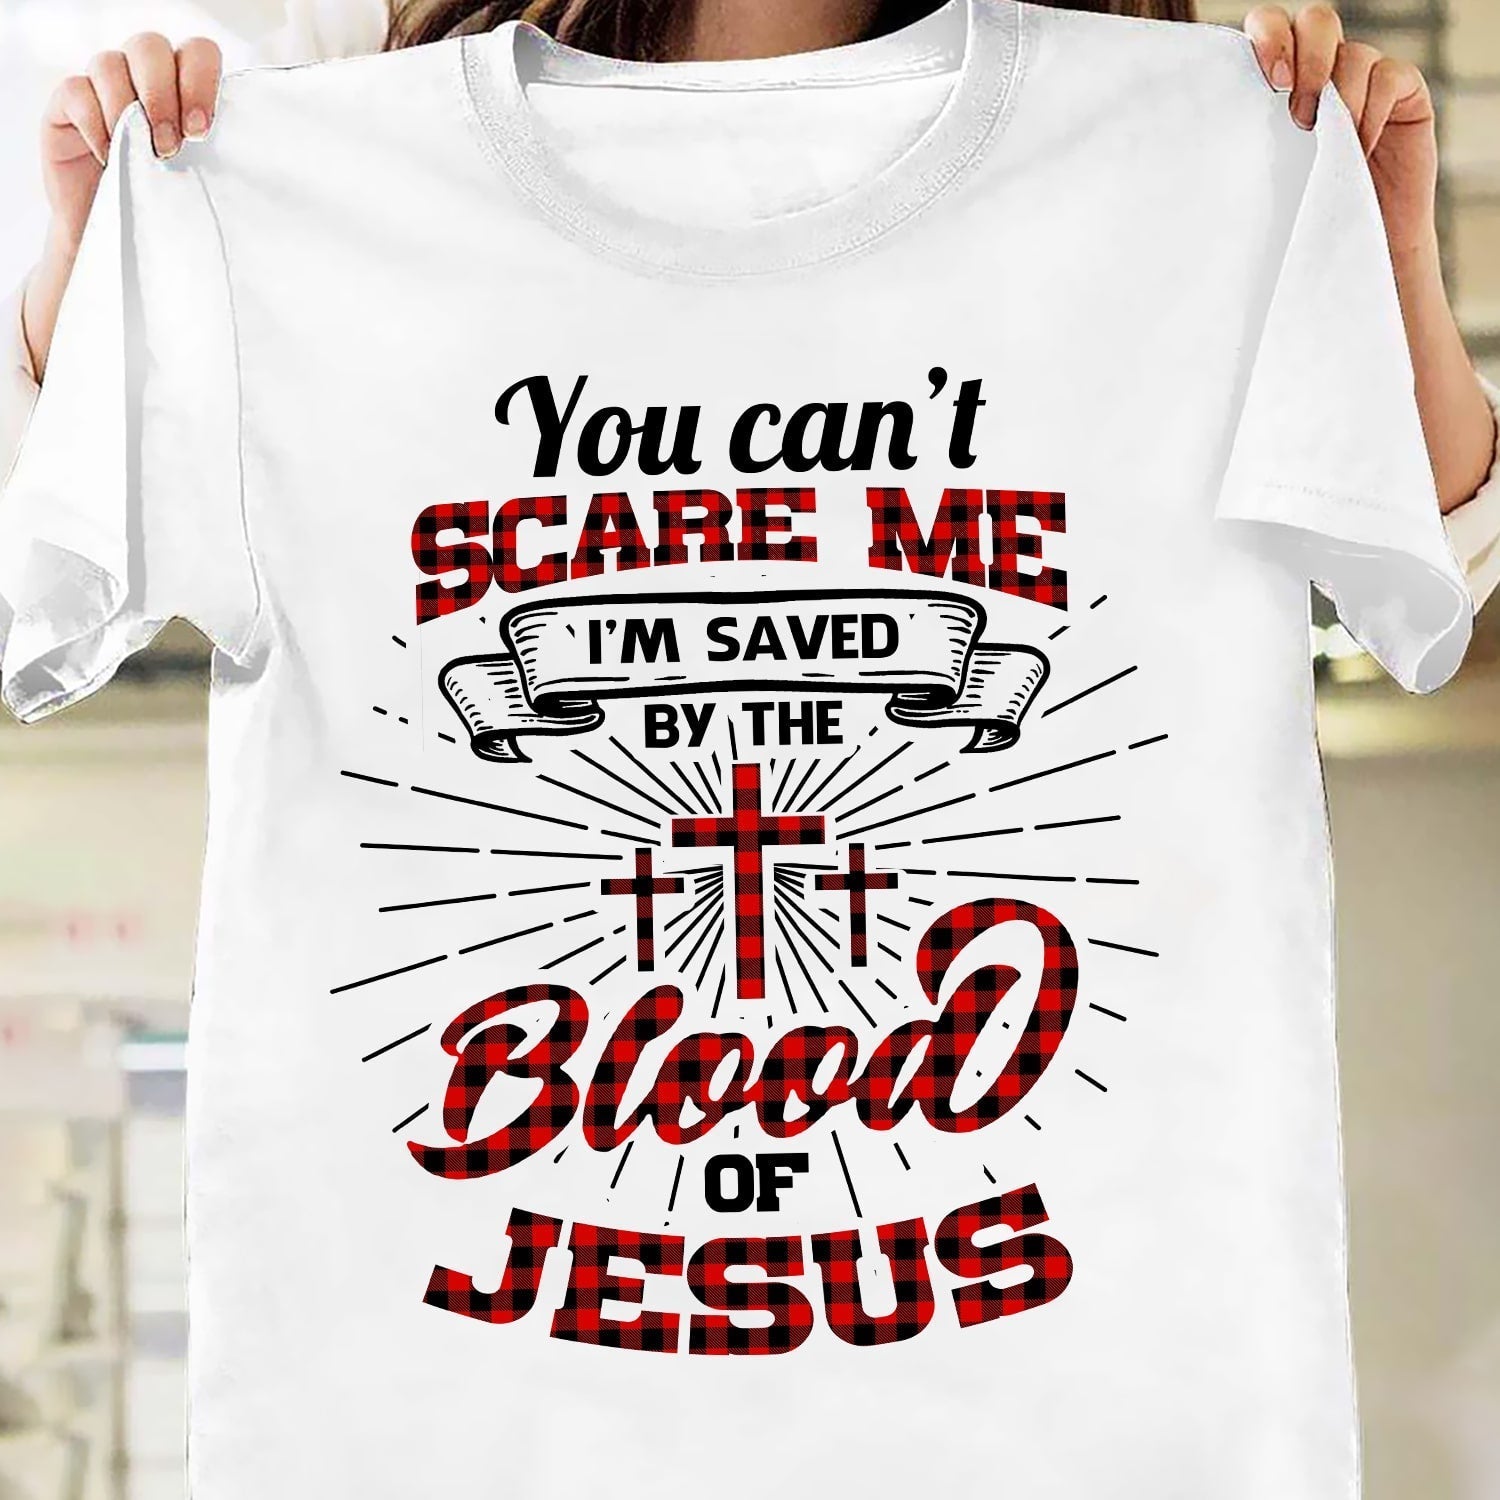 You can’t scare me I’m saved by the blood of Jesus – Jesus T Shirt